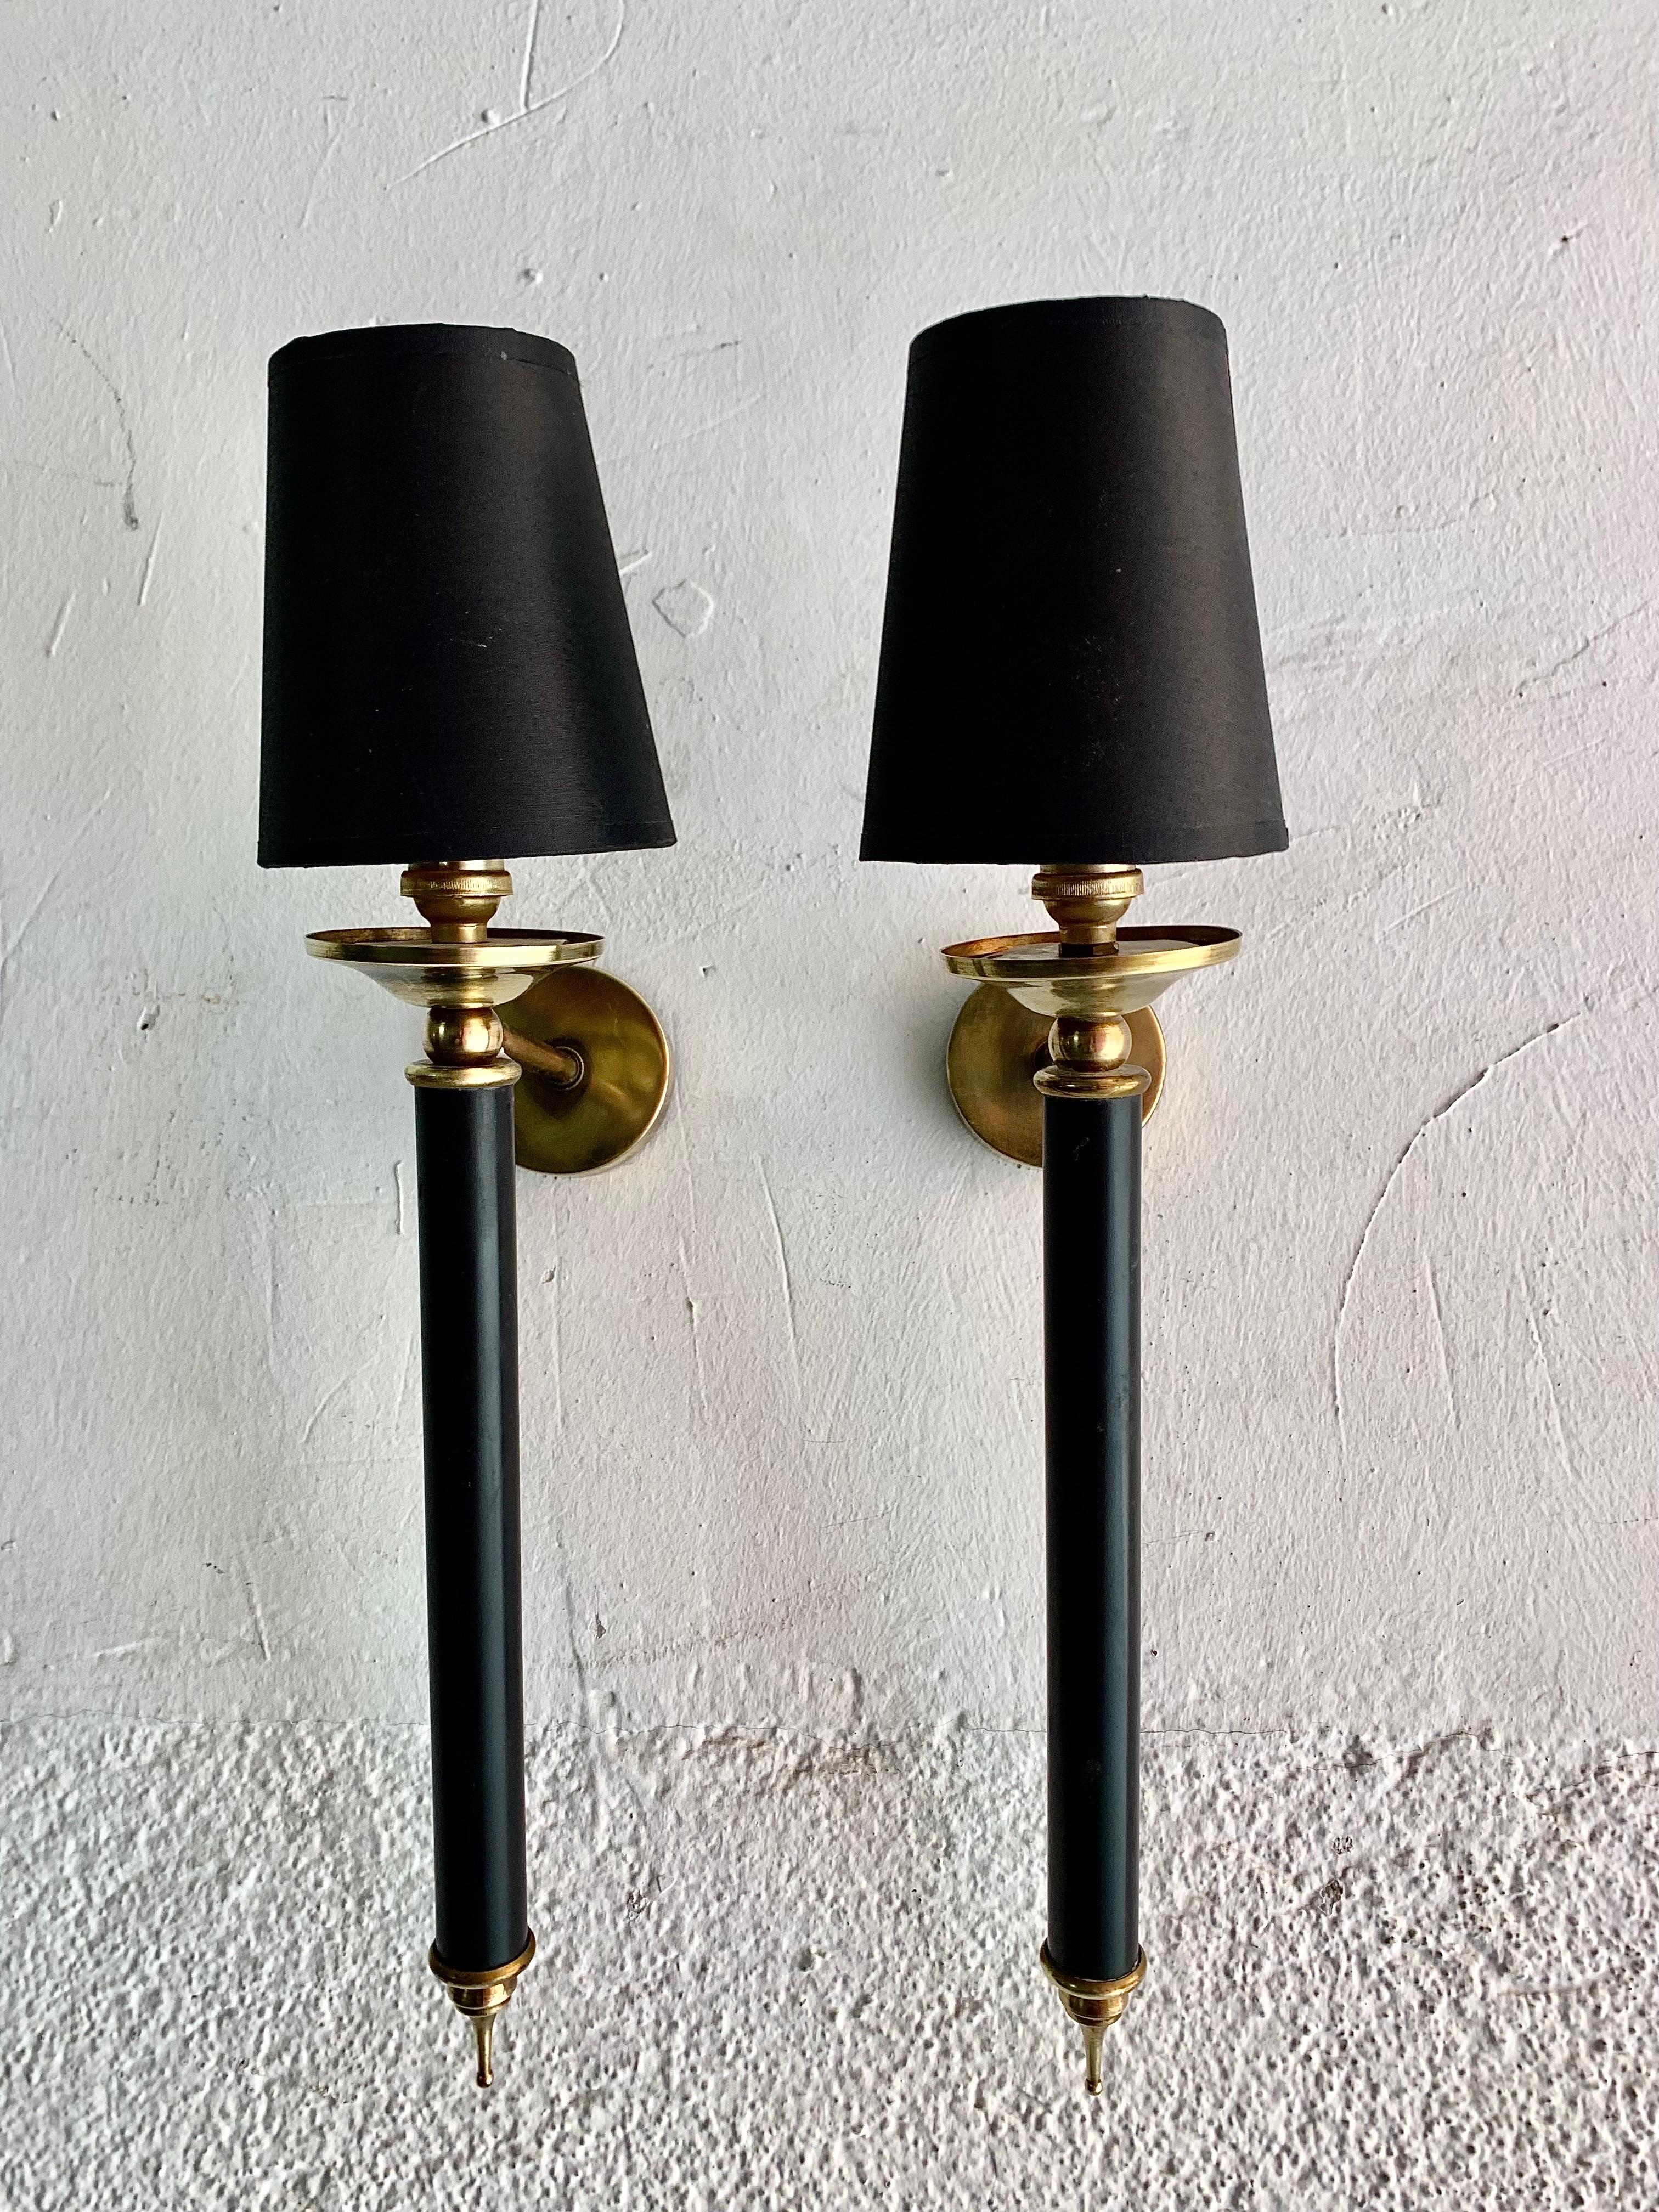 Lacquered Pair of Mid-Century Modern Large Torcheres Wall Sconces Maison Lunel Style For Sale